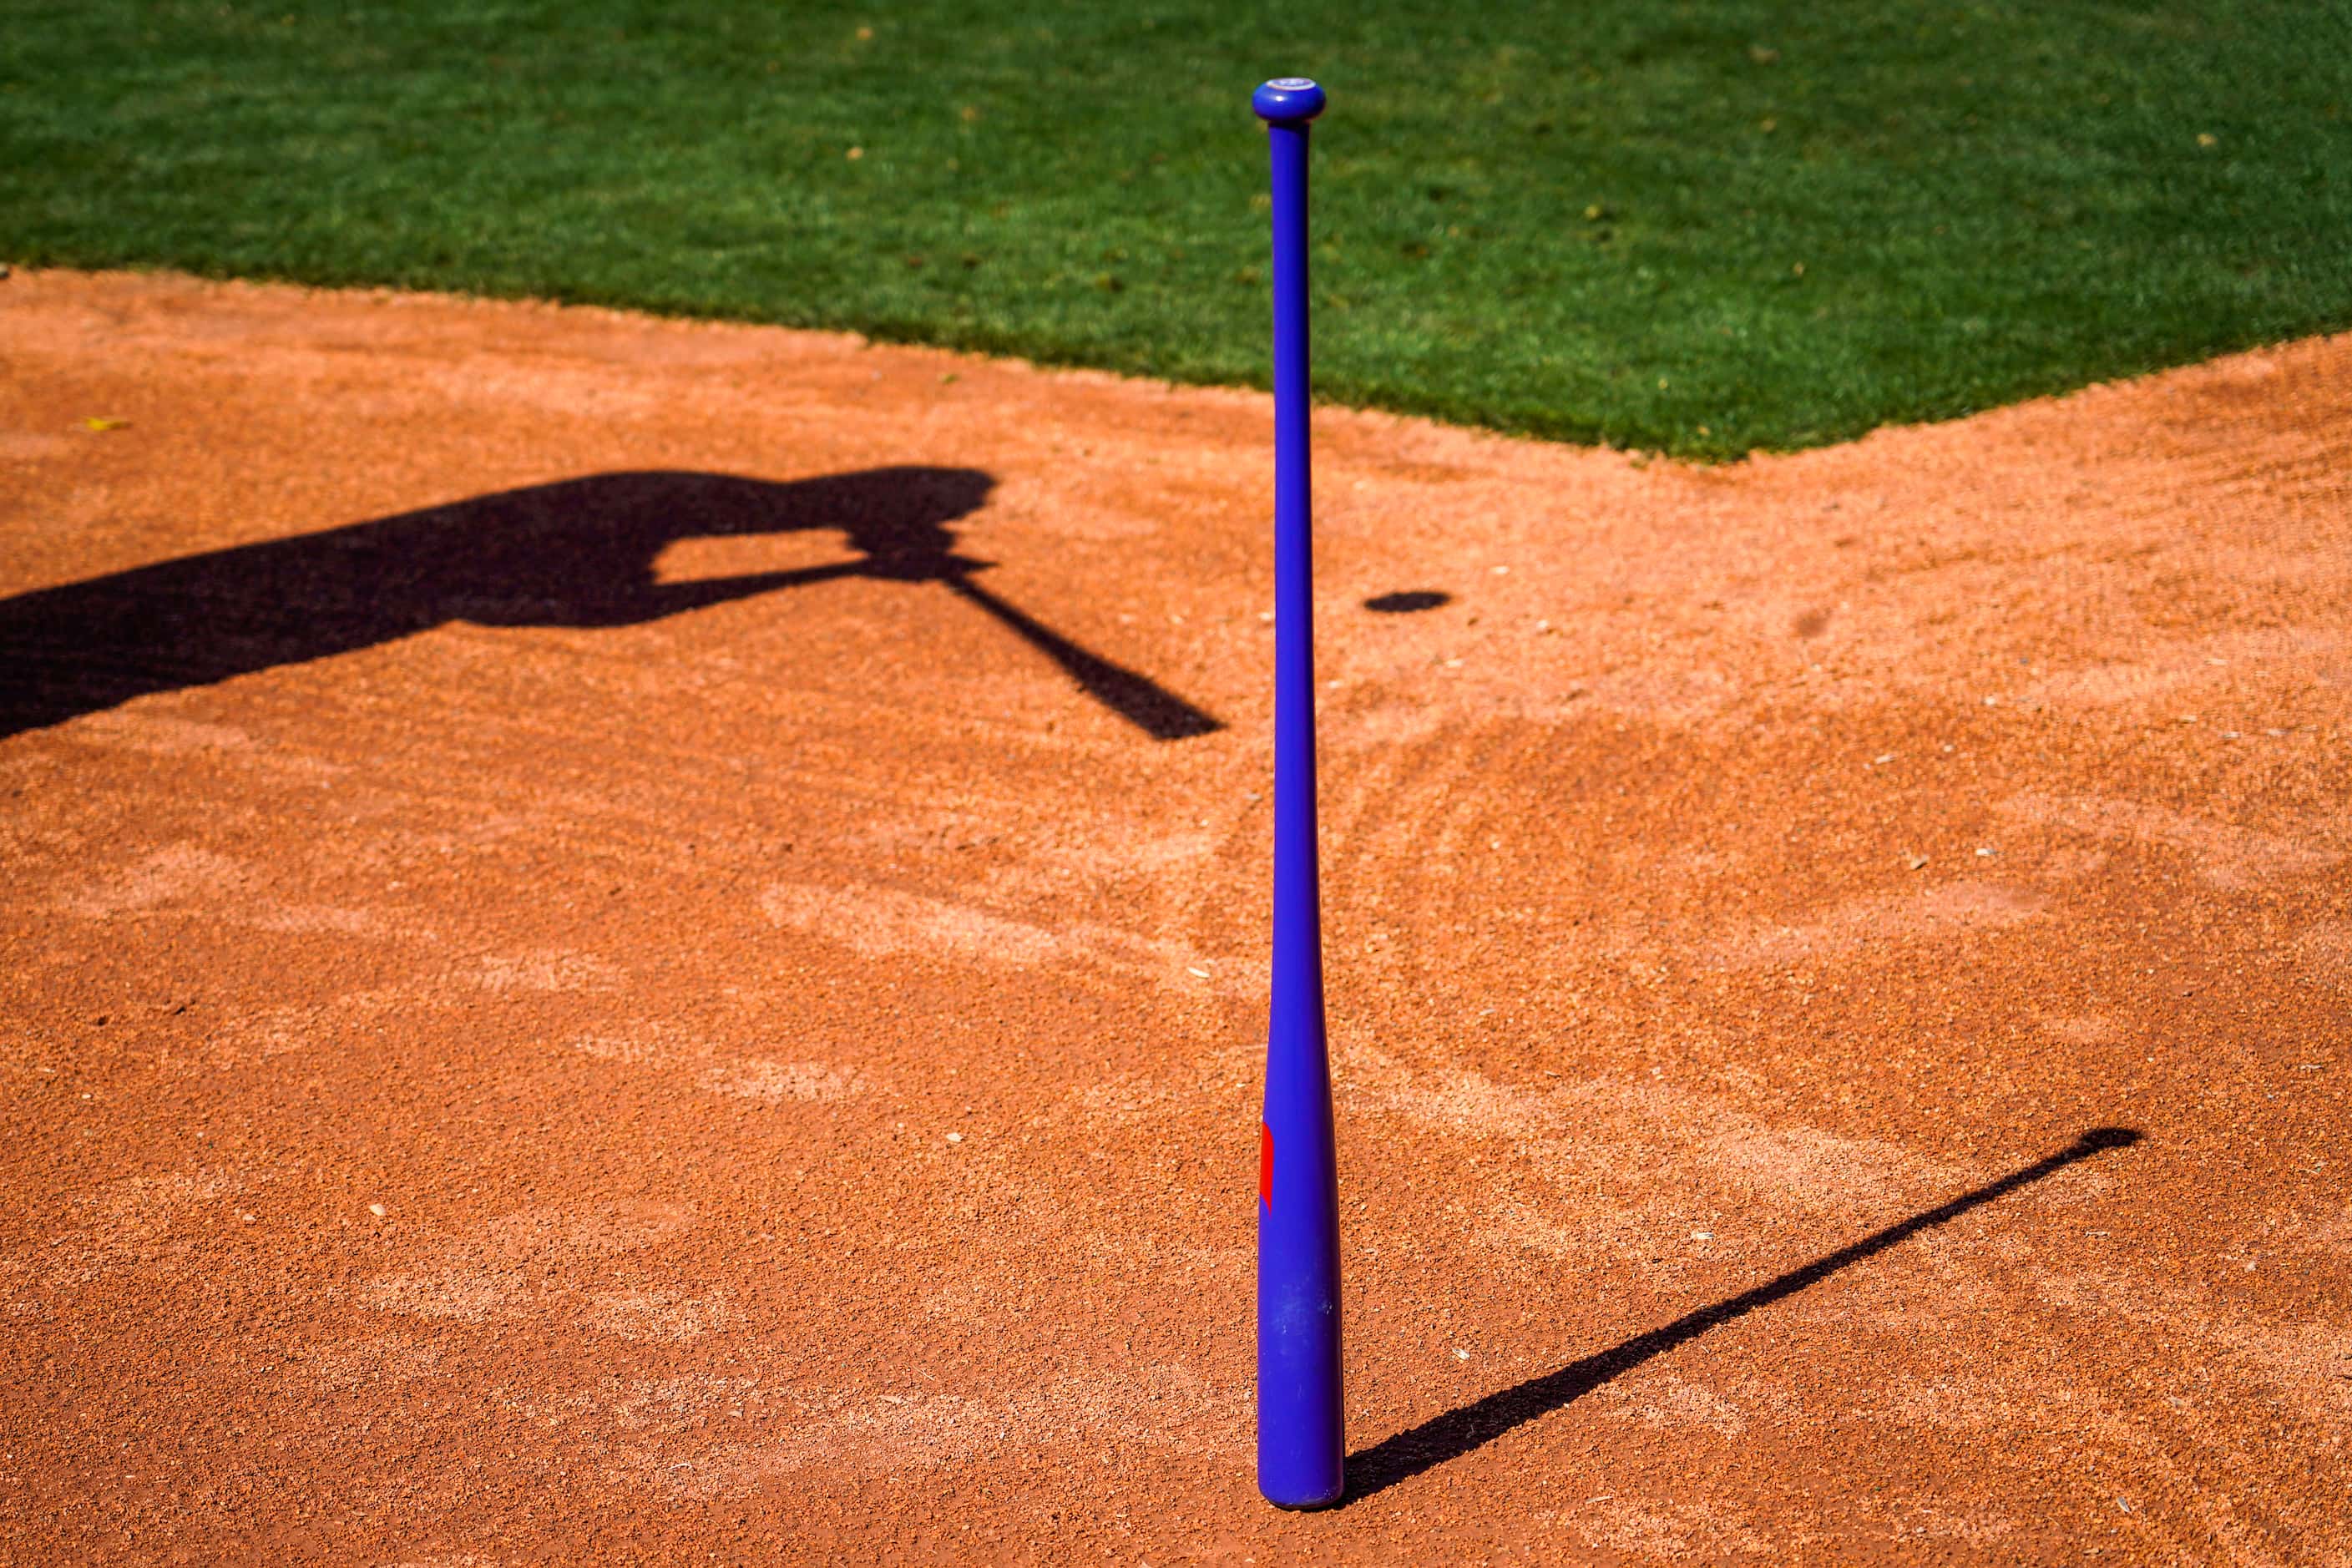 A fungo bat stands near home plate as Steve Buechele casts a shadow while hitting grounders...